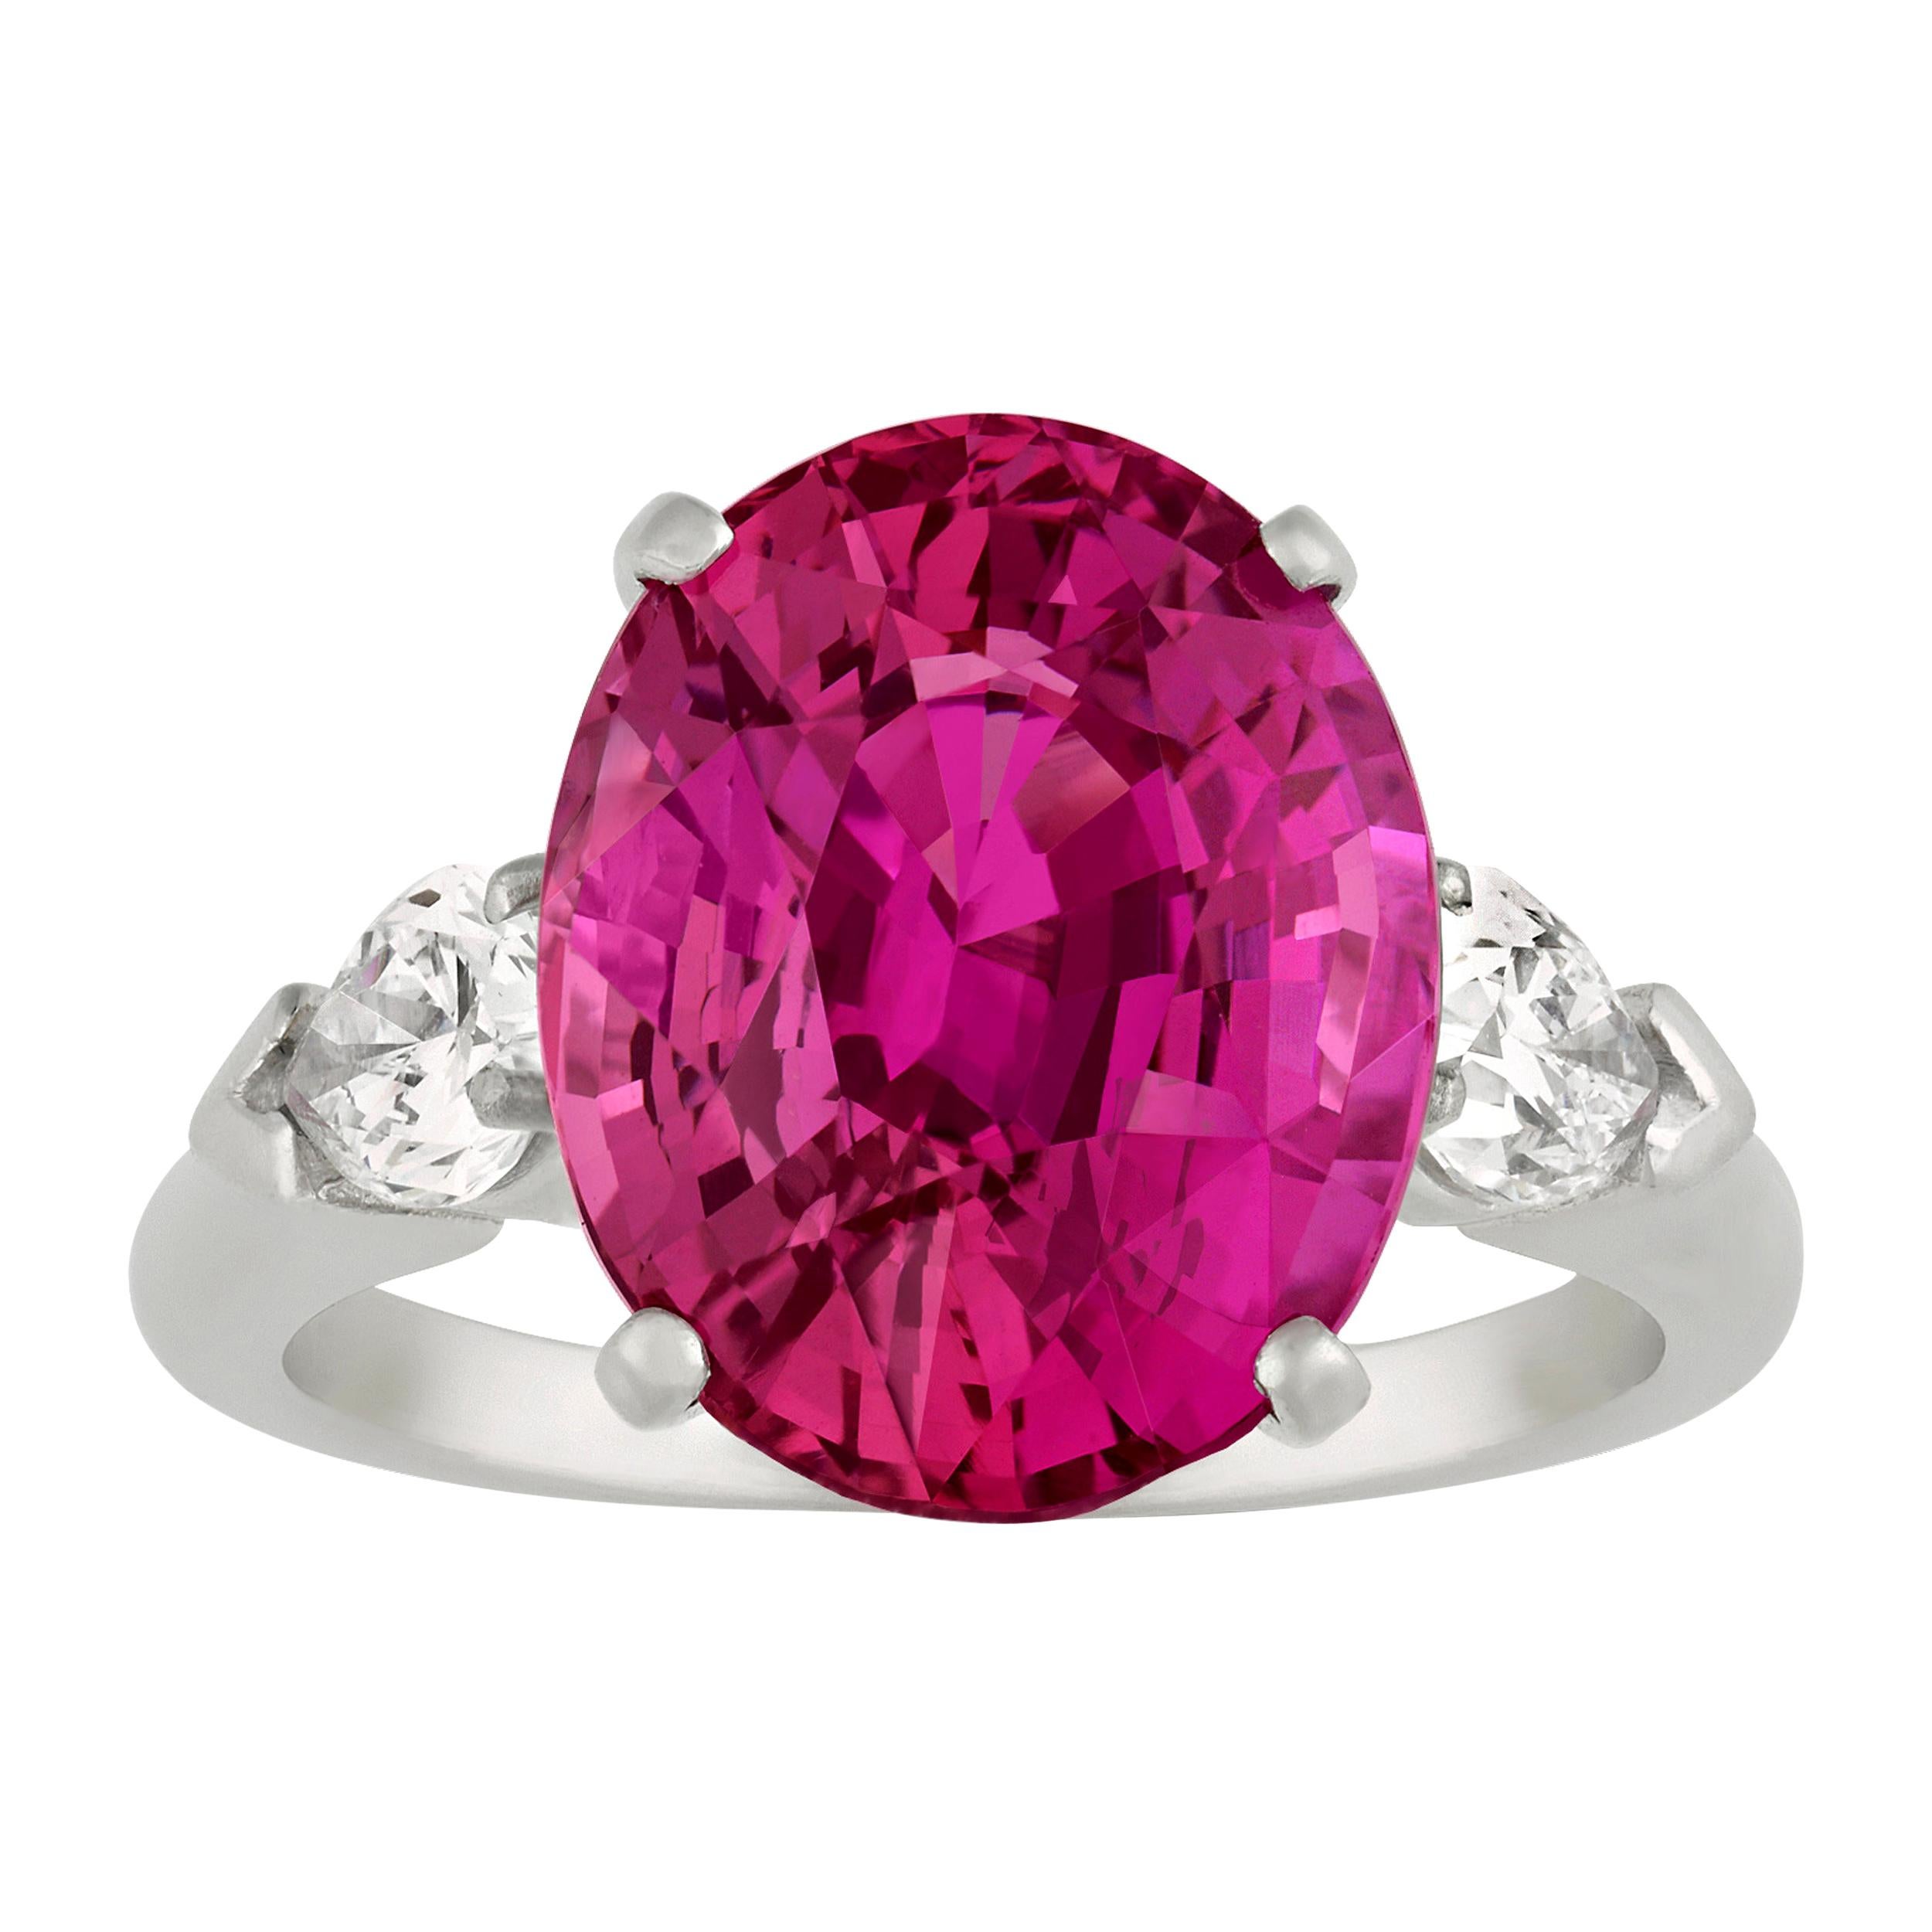 Untreated Pink Sapphire Ring by Graff, 7.51 Carats